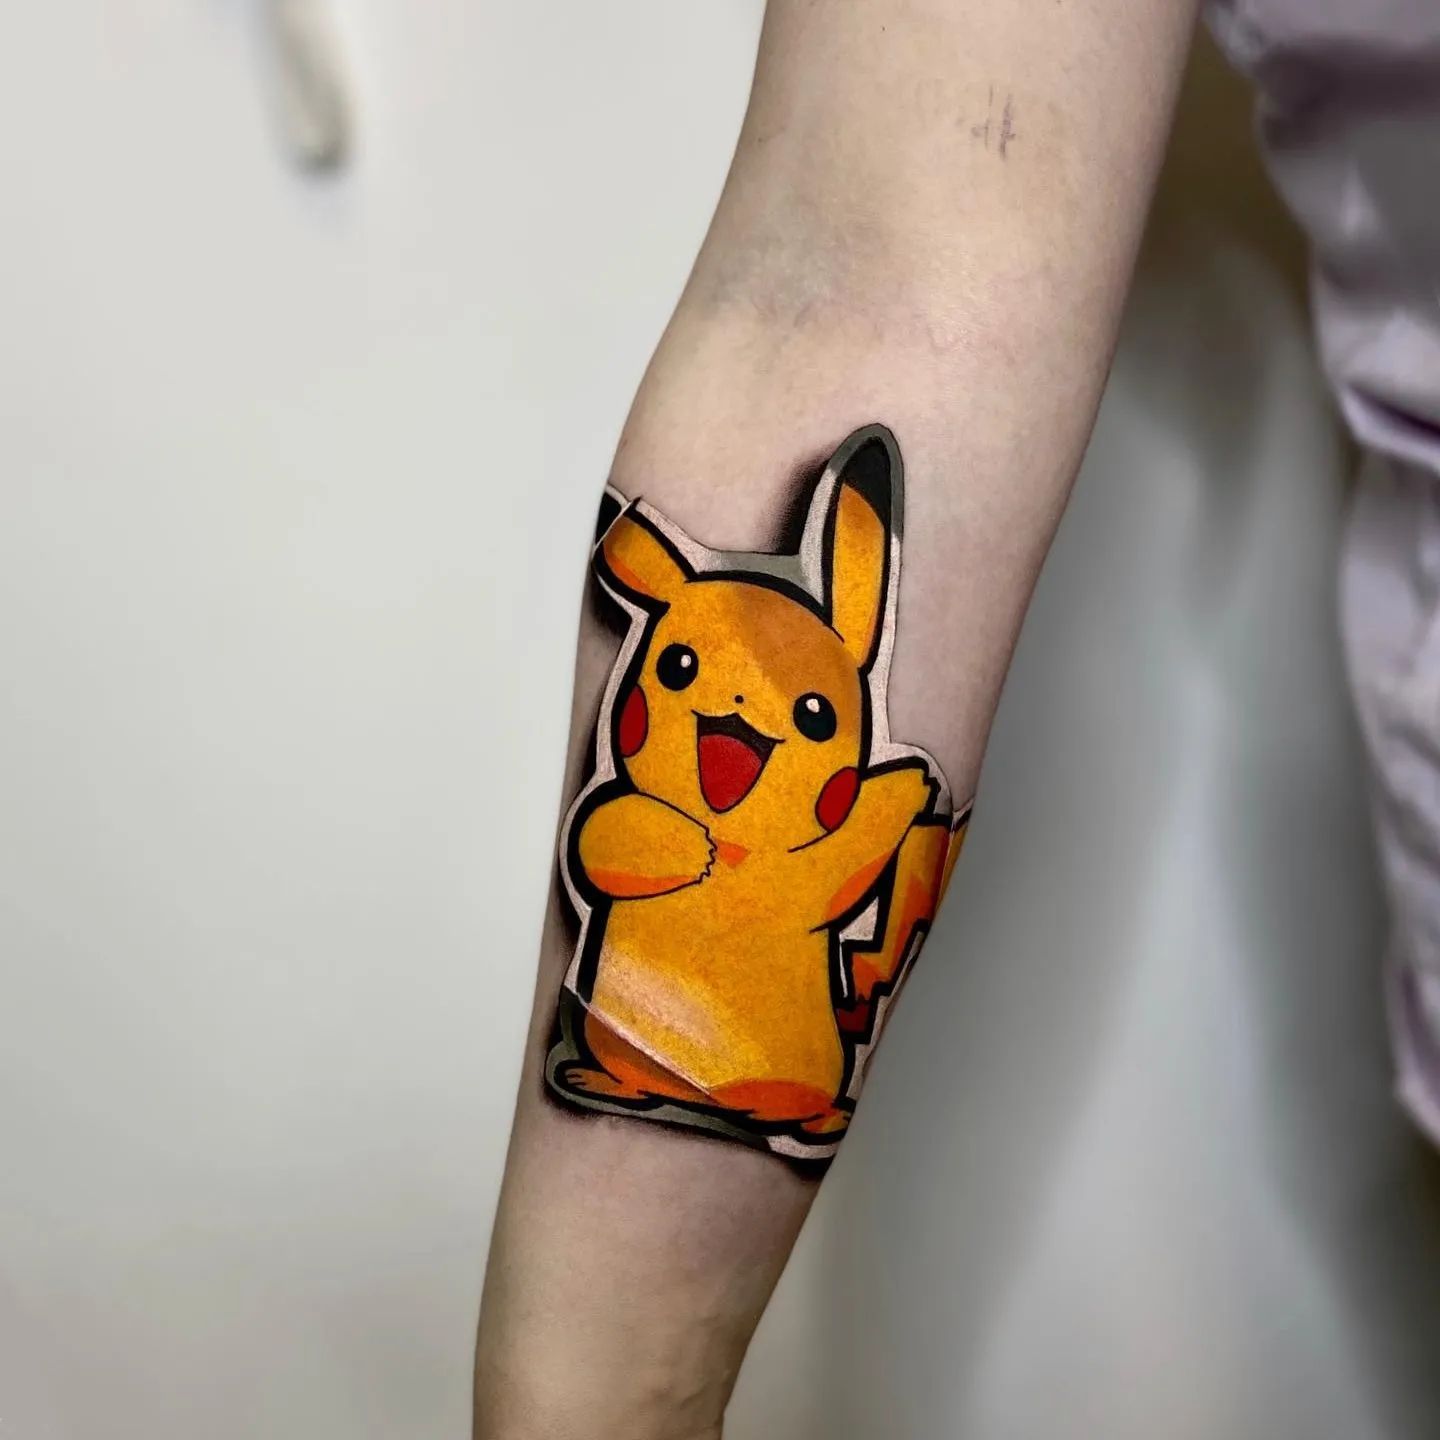 Pikachu nails are a great way to show your love of Pokemon. Pikachu is a yellow mouse-like creature with long ears and red cheeks, and it is the most famous Pokemon. Let's go and get it.